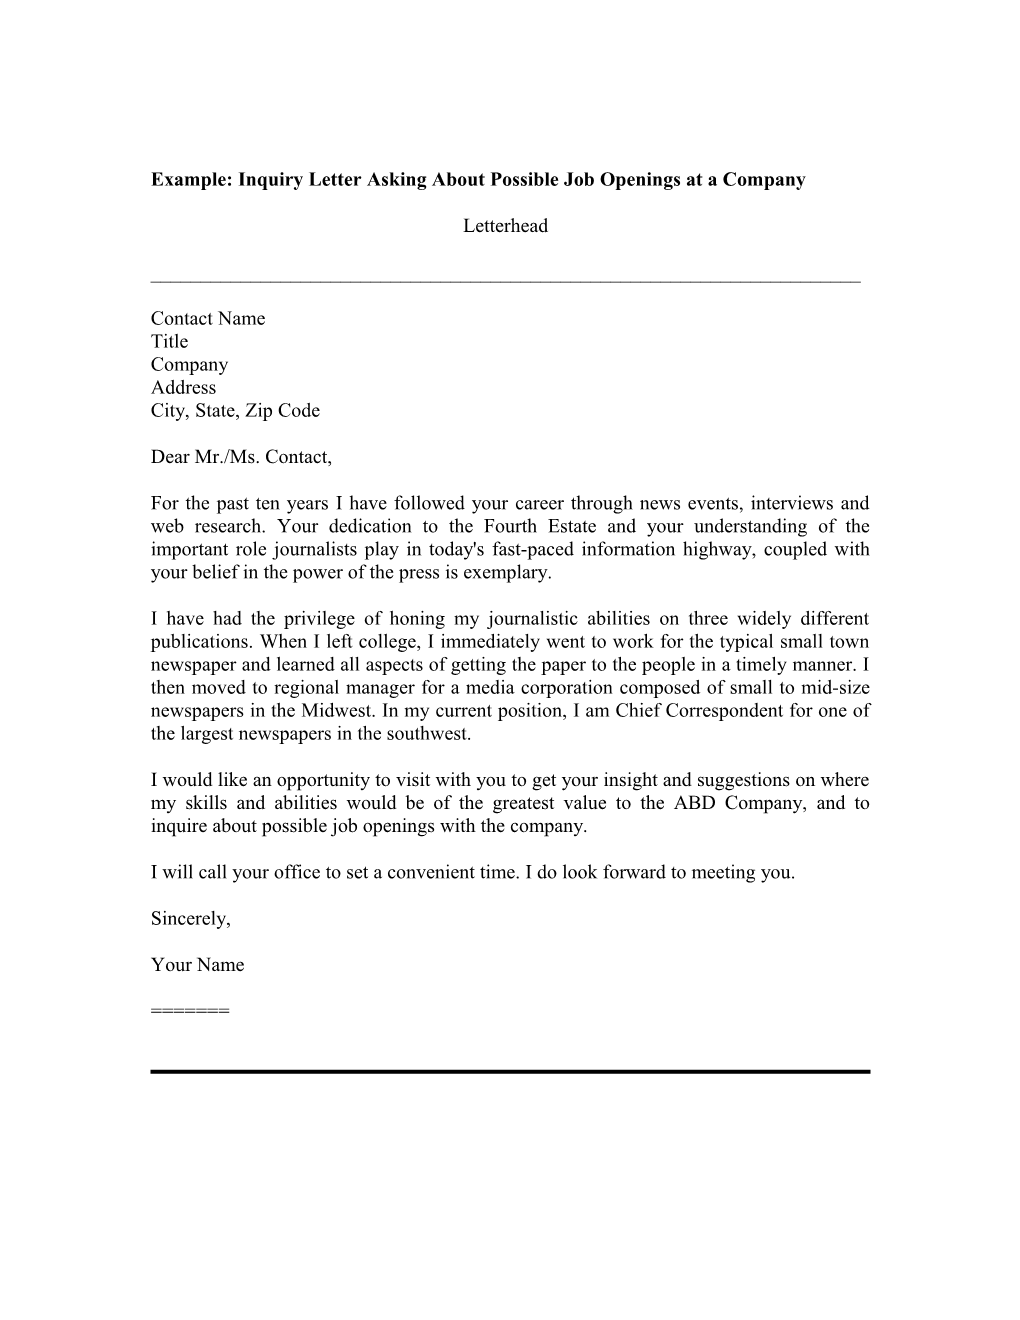 Example: Inquiry Letter Asking About Possible Job Openings at a Company